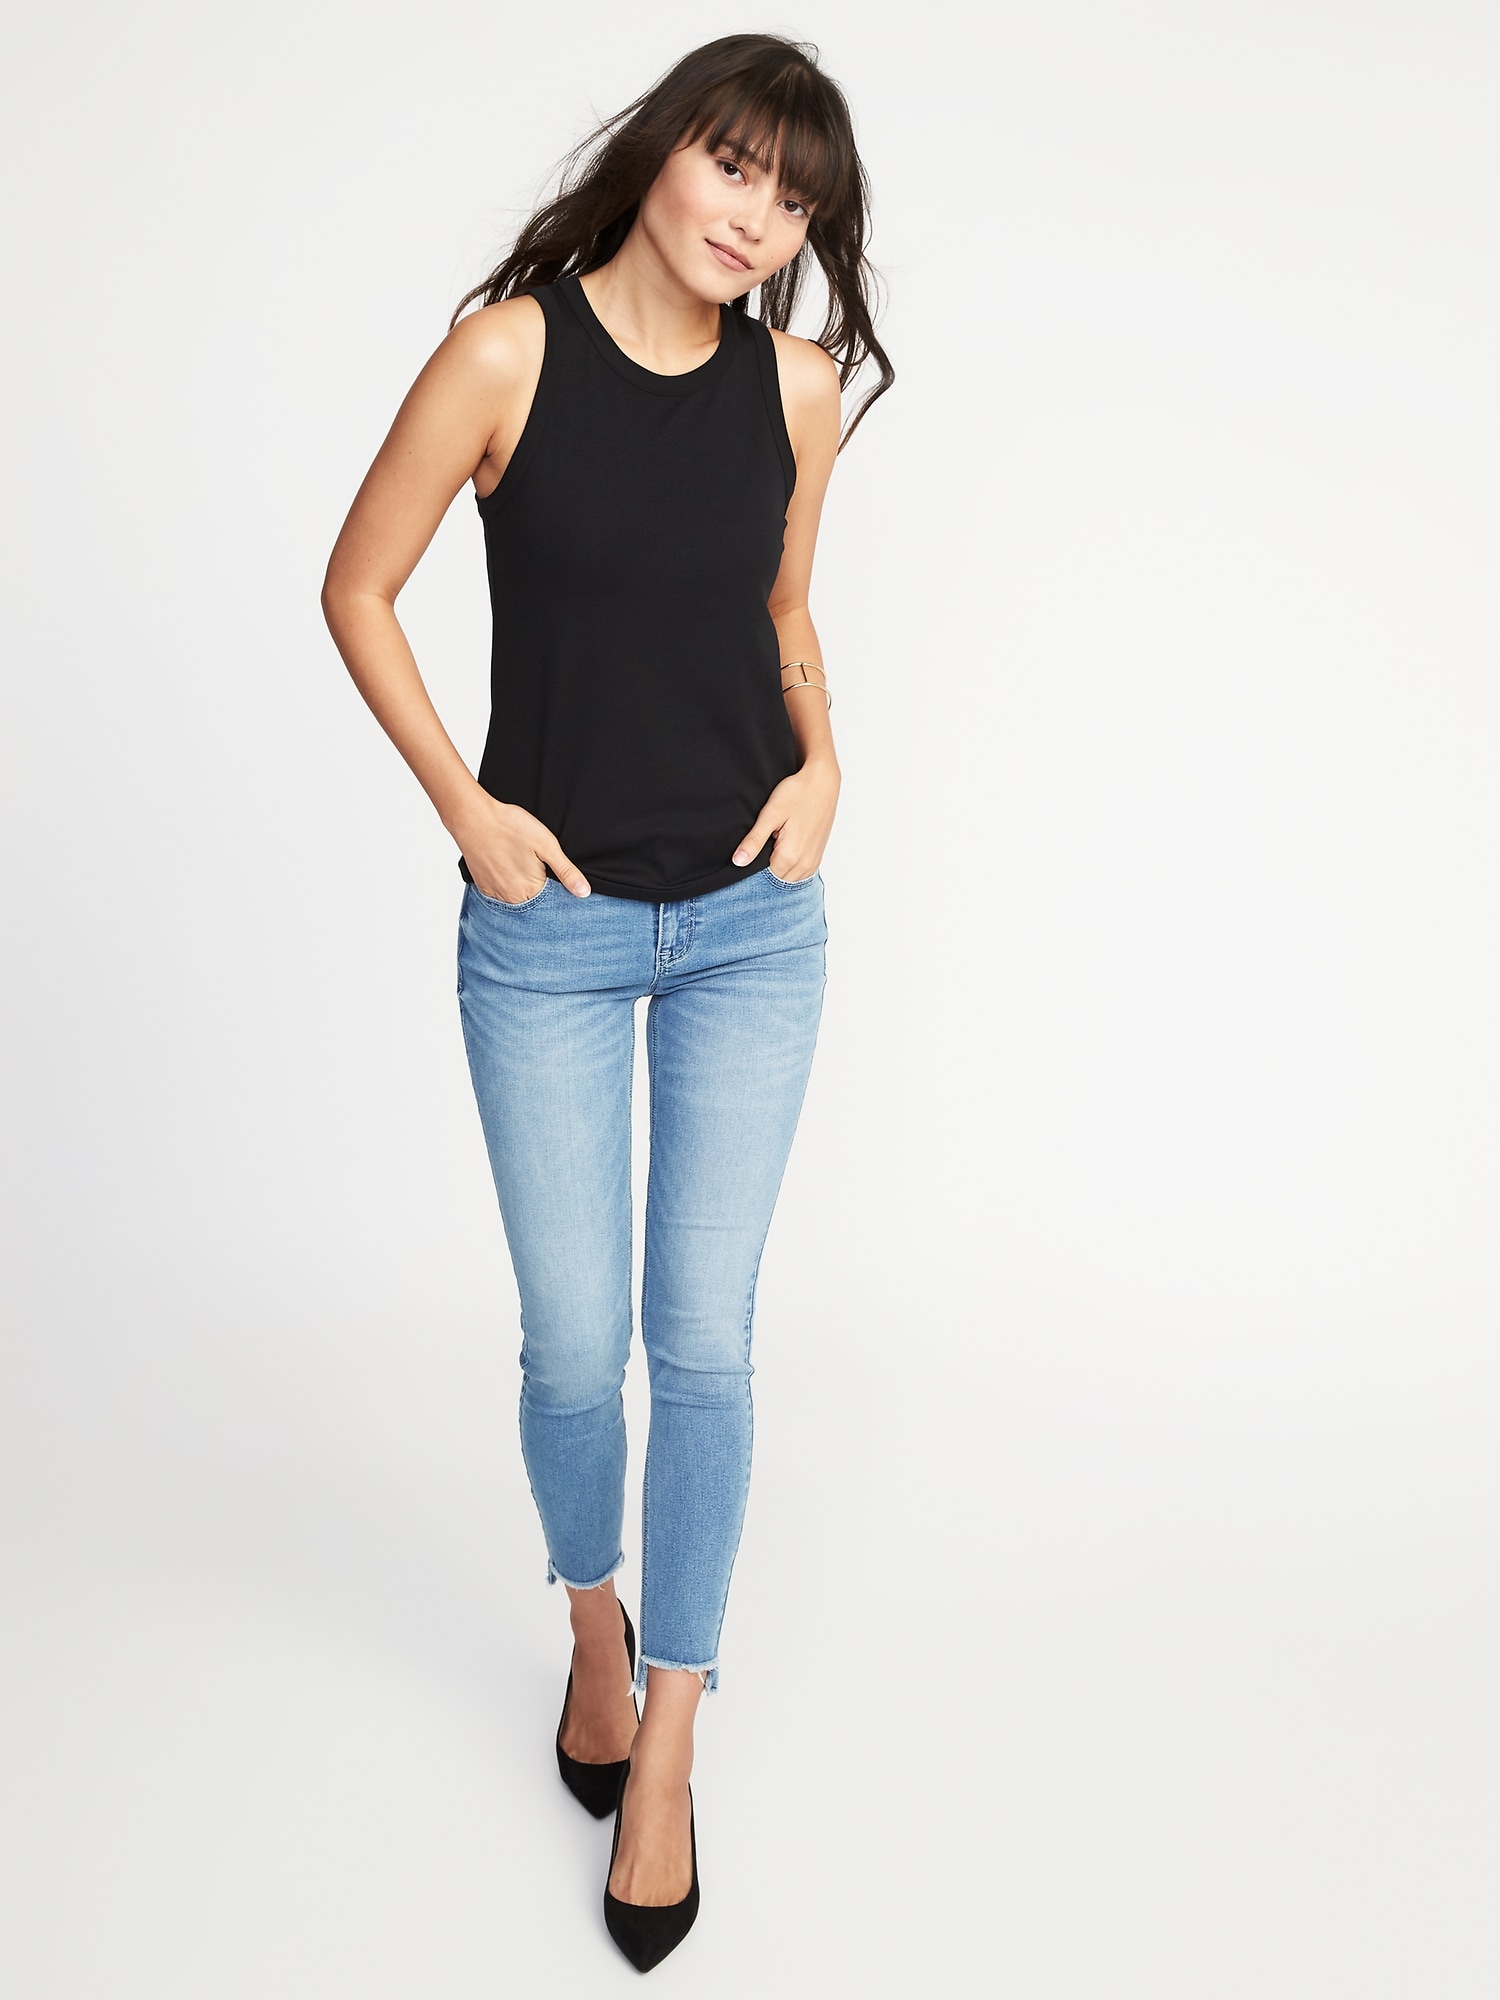 Slim-Fit High-Neck Sleeveless Tee for Women | Old Navy